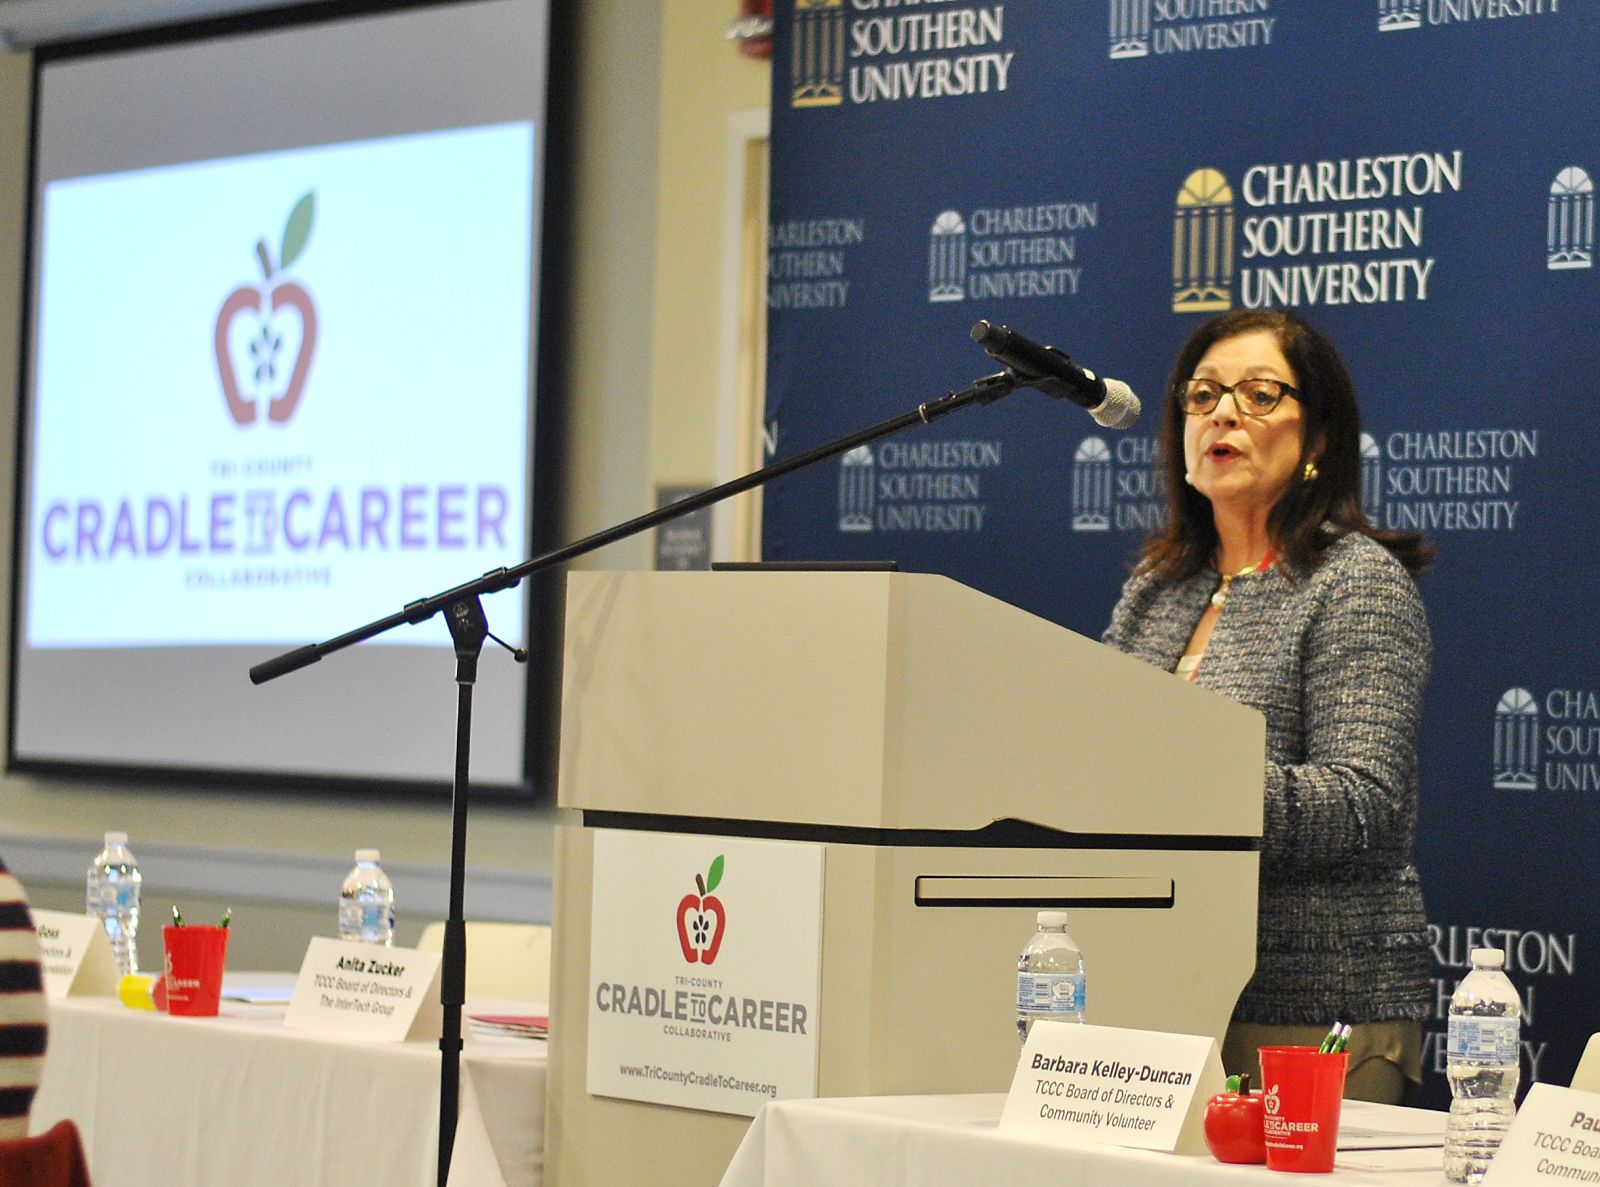 Tri-County Cradle to Career Collaborative board member Anita Zucker discusses how the education system in the Lowcountry could be changed to provide better outcomes for all students. (Photo/Ryan Wilcox)